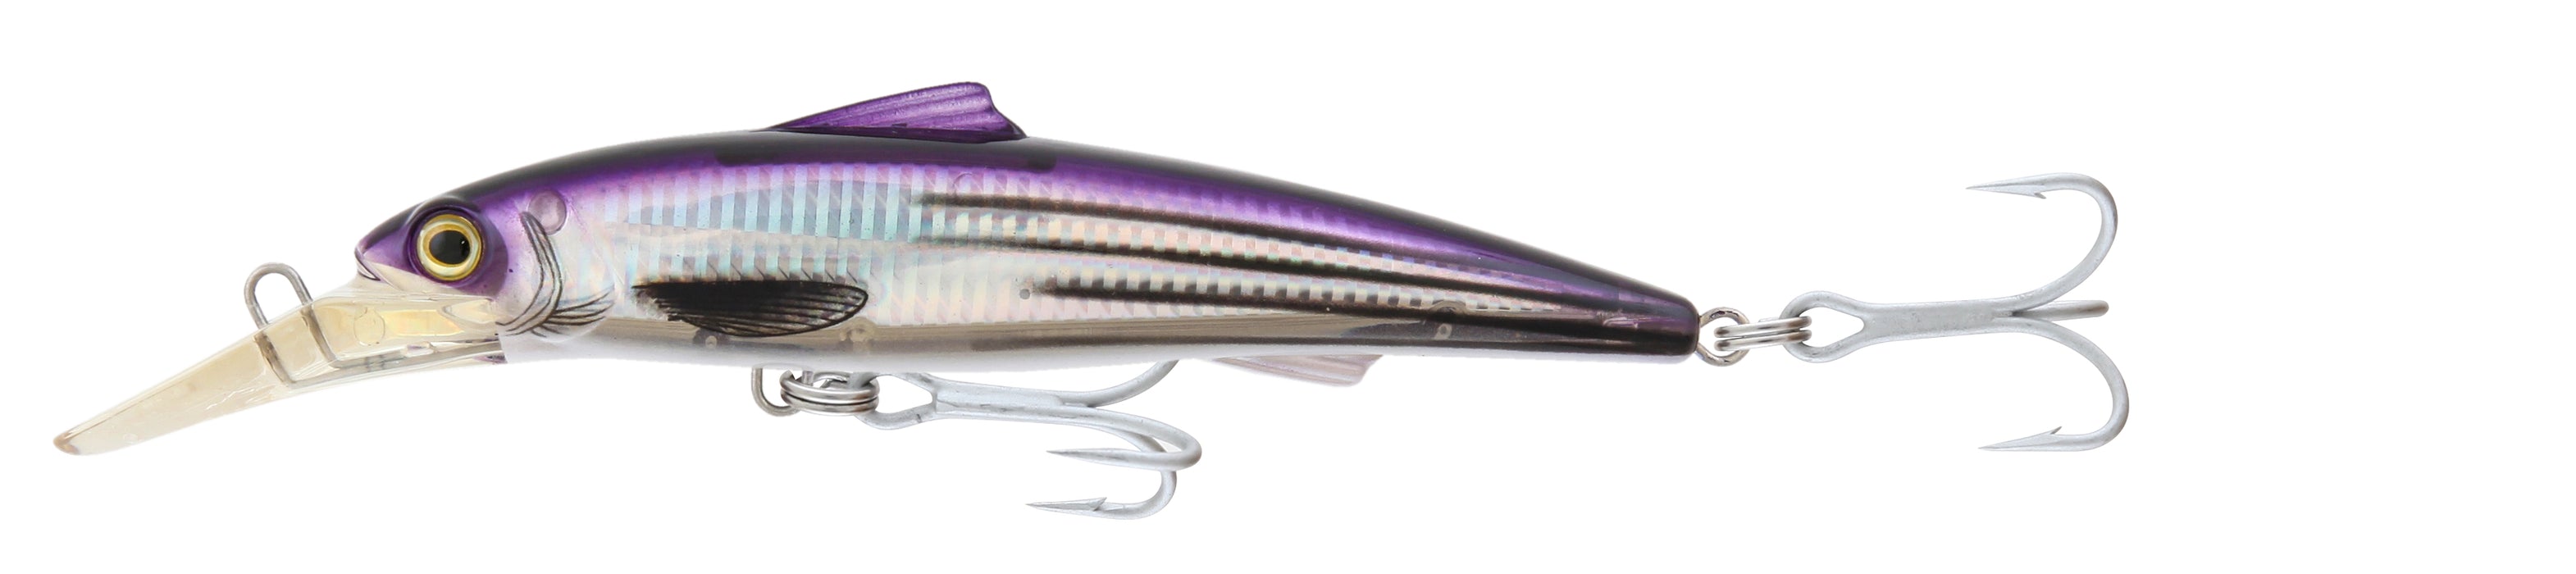 Samaki Pacemaker 140mm Lures